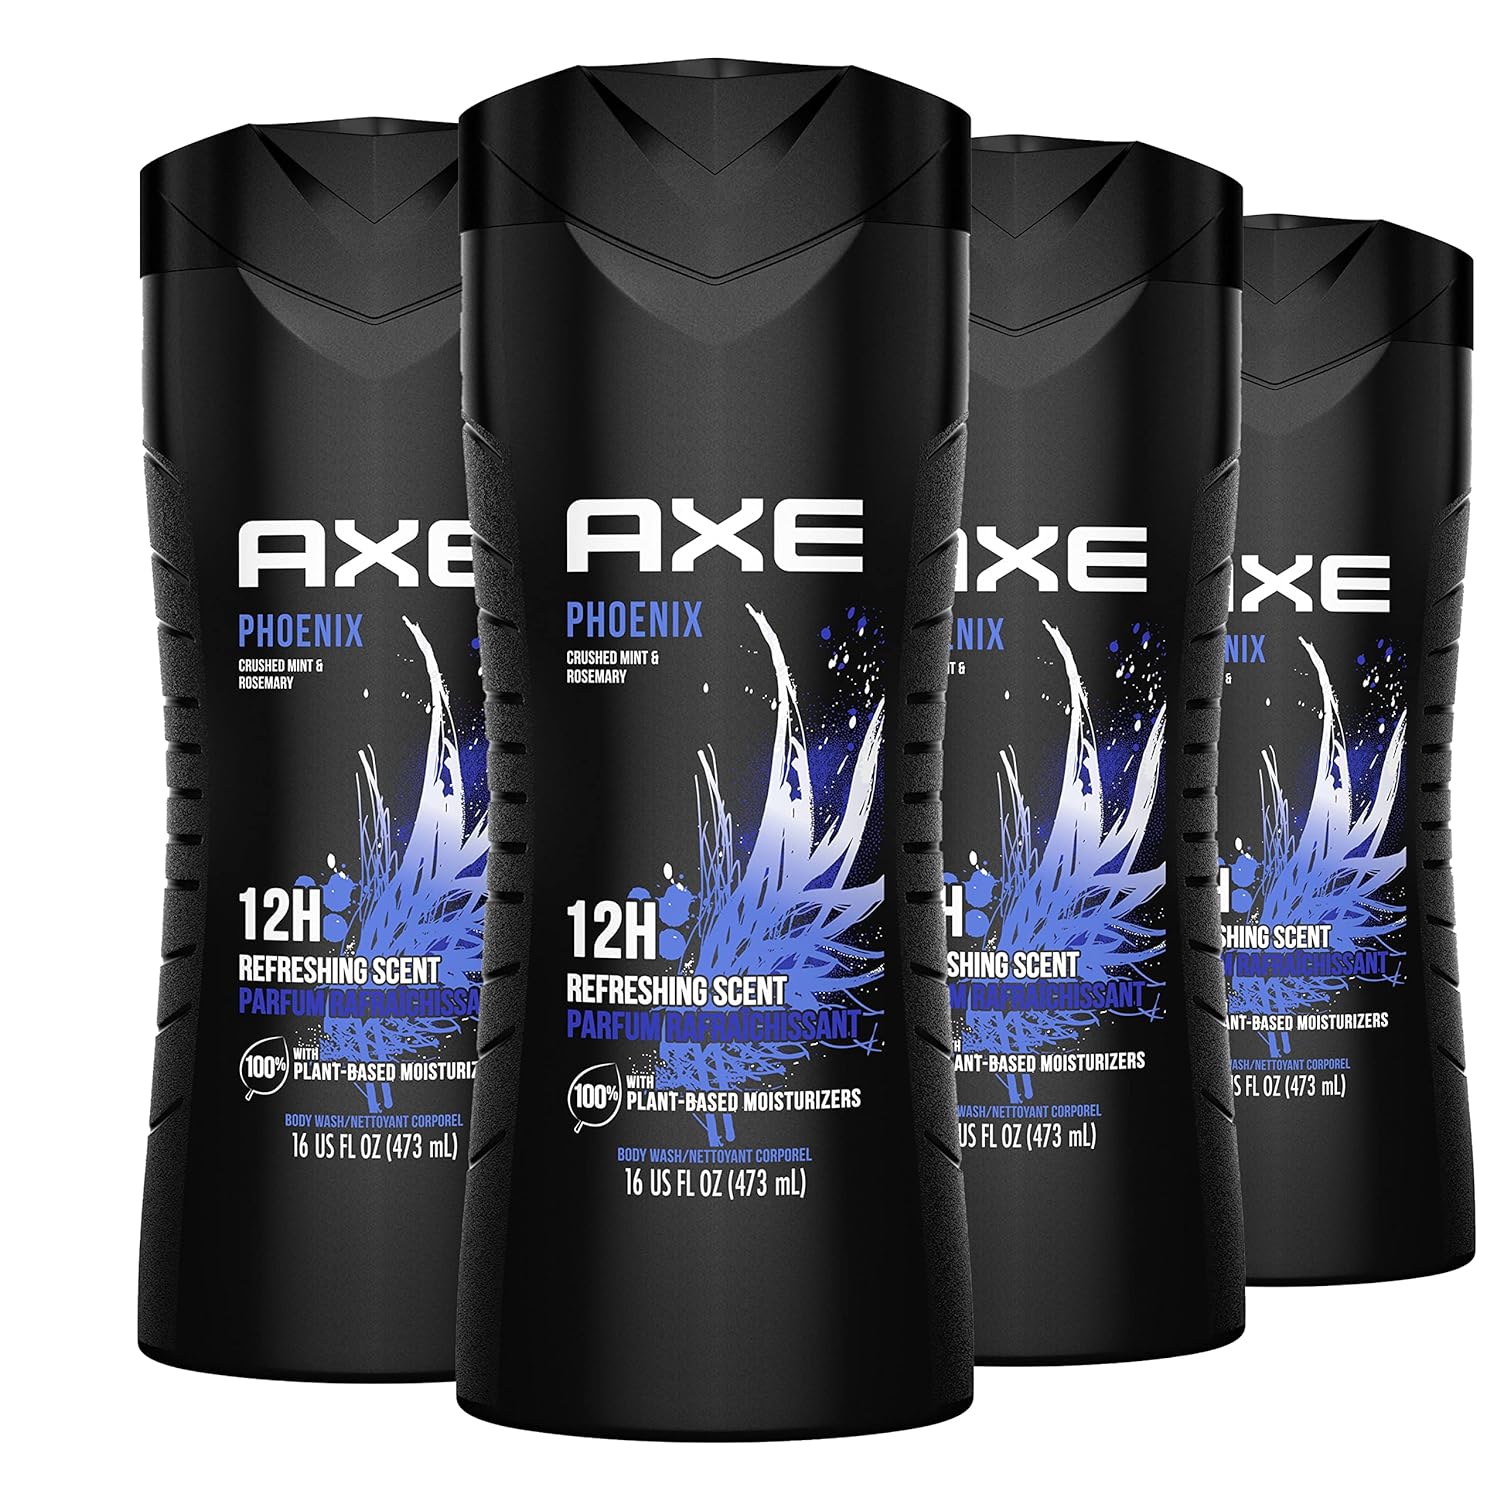 Select Amazon Accounts (YMMV): 4-Count 16-Oz AXE Men's Body Wash Phoenix (Crushed Mint & Rosemary) $5.15 w/ S&S + Free Shipping w/ Prime or on $35+